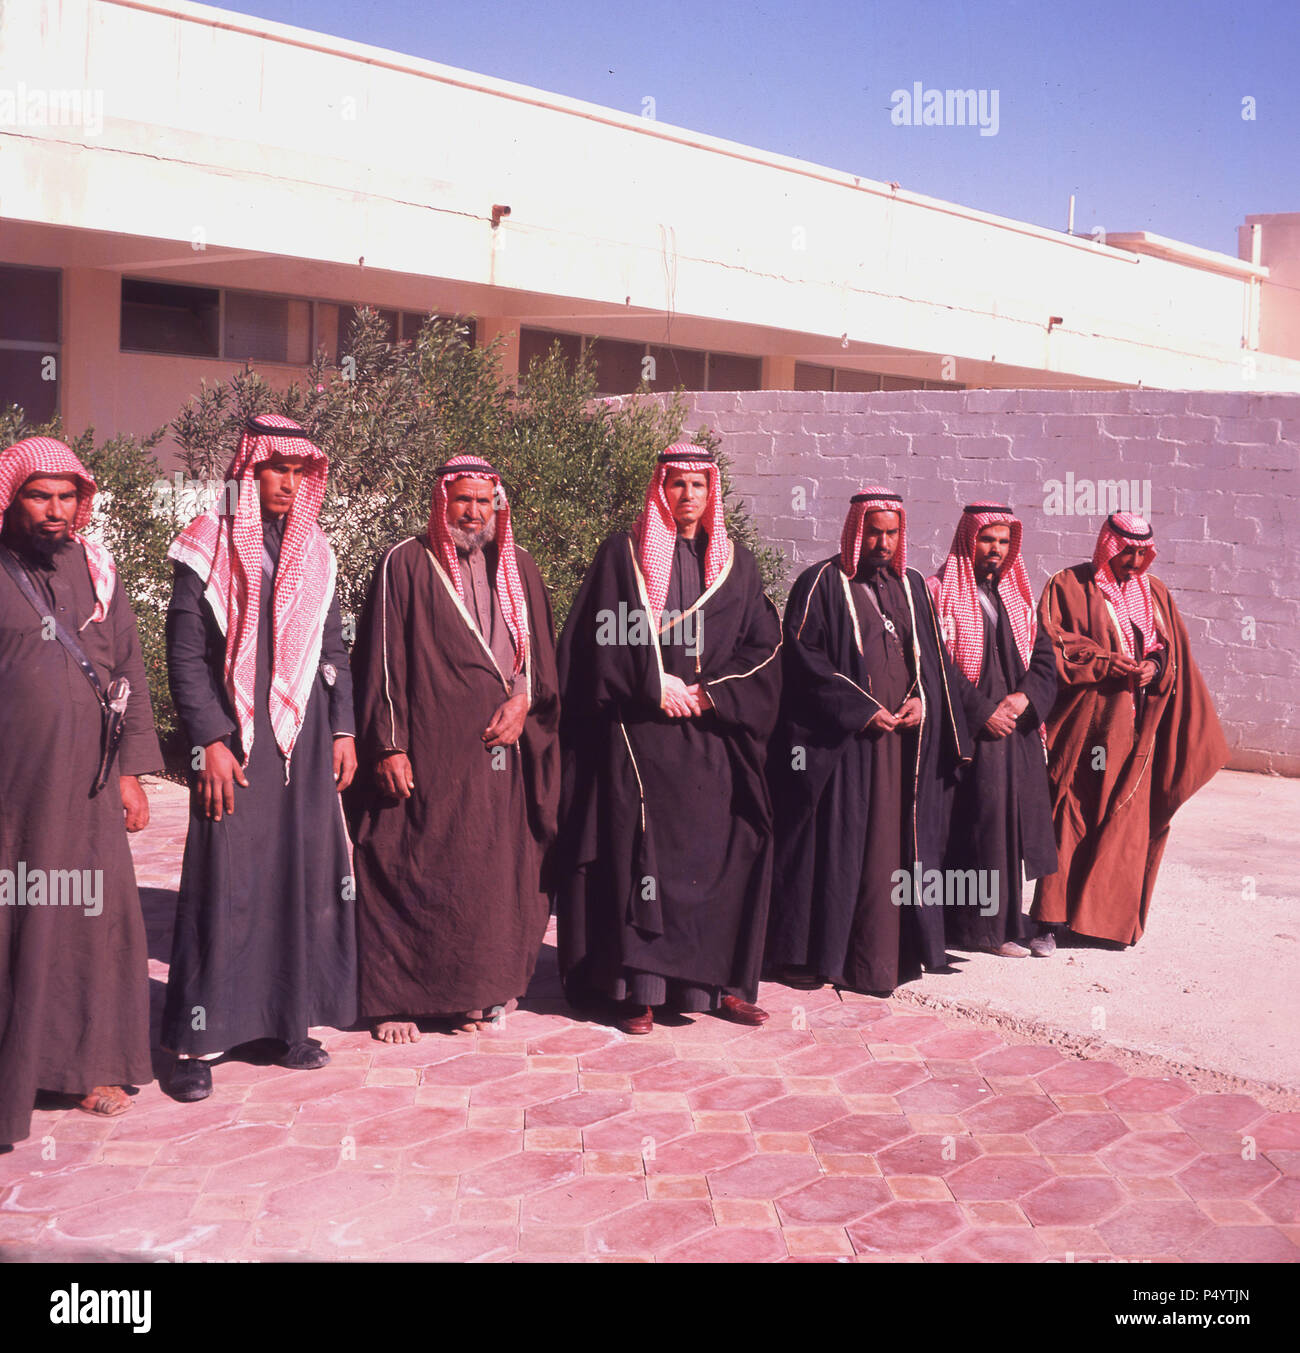 1960s, historical, at the Al-Kharj oasis, the Saudi Prince of Kharj standing outside a building with his advisors, Saudi Arabia. The men are all dressed in thawbs, the ankle-length garments that are traditional cothing for arabian males. Al-Kharj is situated by a number of deepwater pools and an experimental farm was established there in 1938. The following years saw the area became an important place for the development of Saudi agriculture. Stock Photo